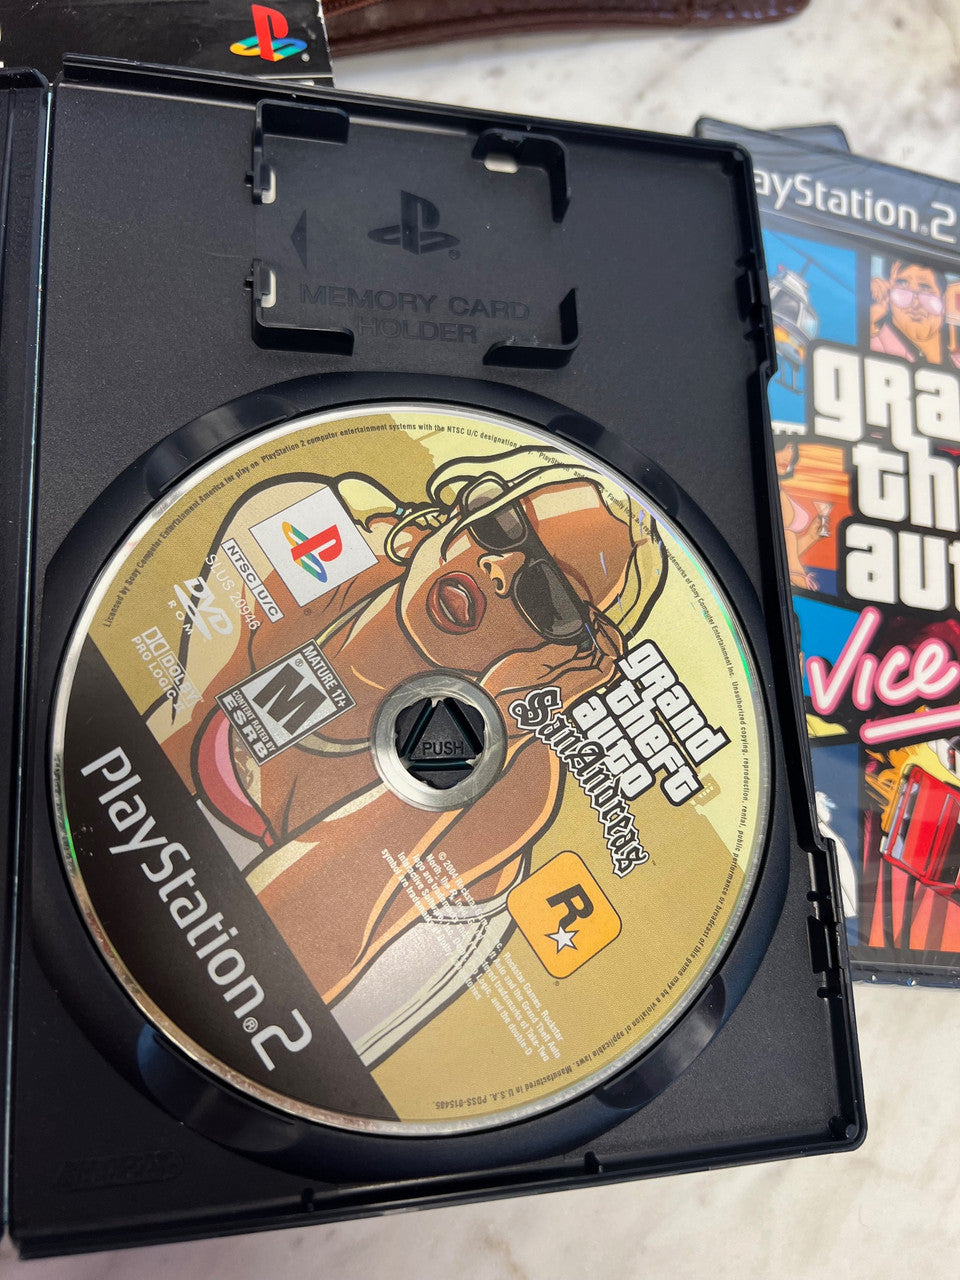 Grand Theft Auto Trilogy Playstation 2 PS2 Half sealed See notes